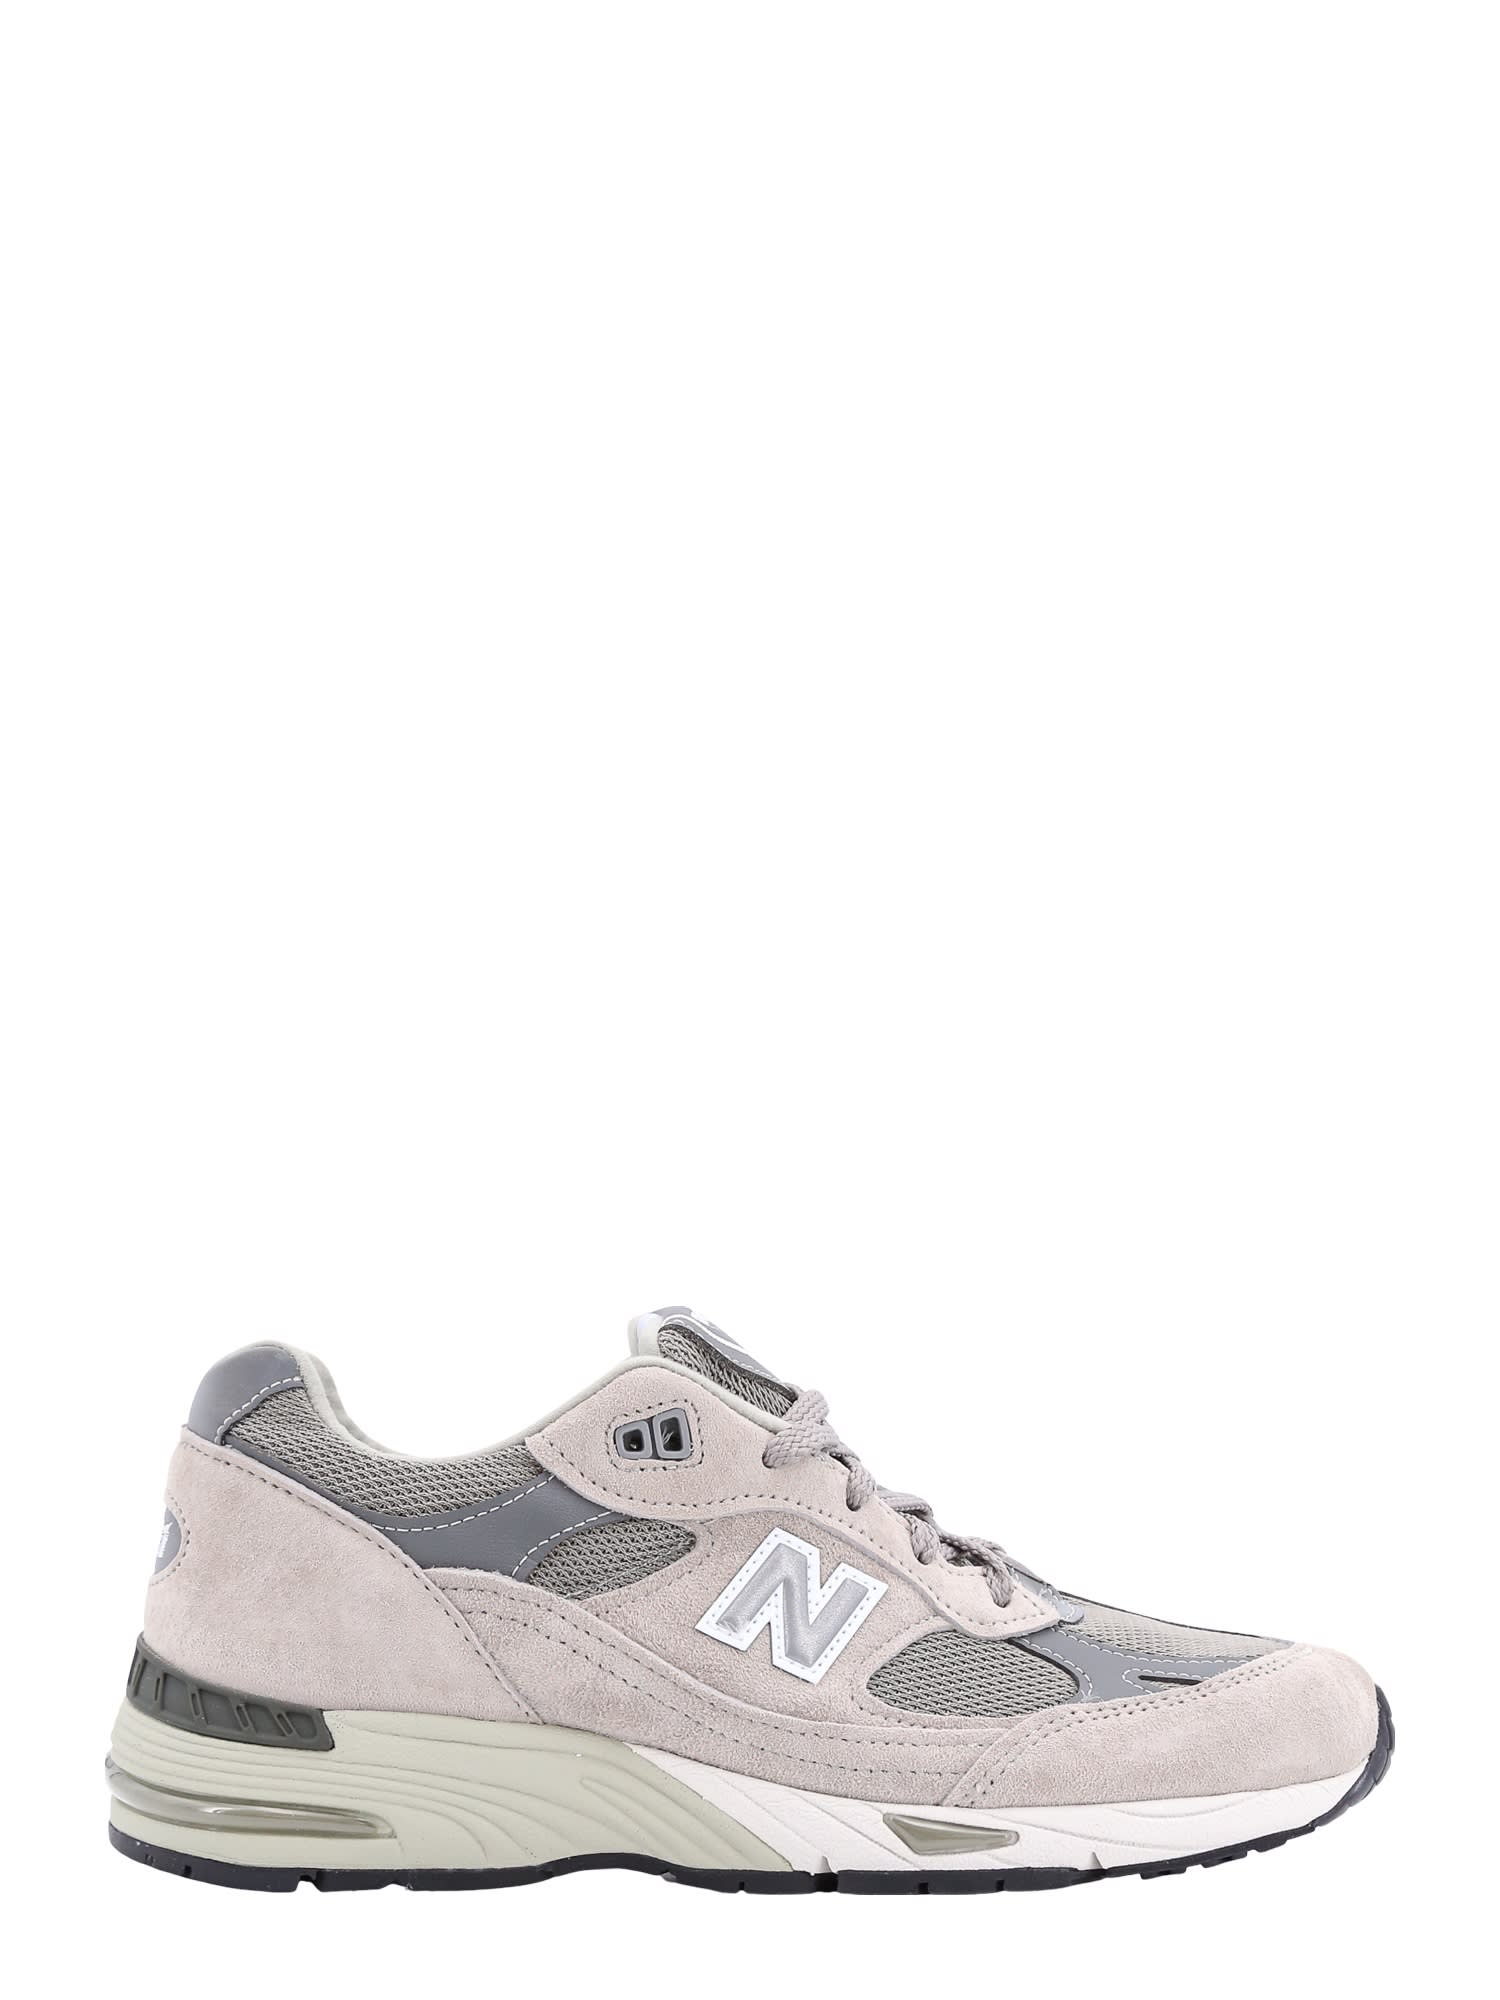 New Balance 991 Sneakers